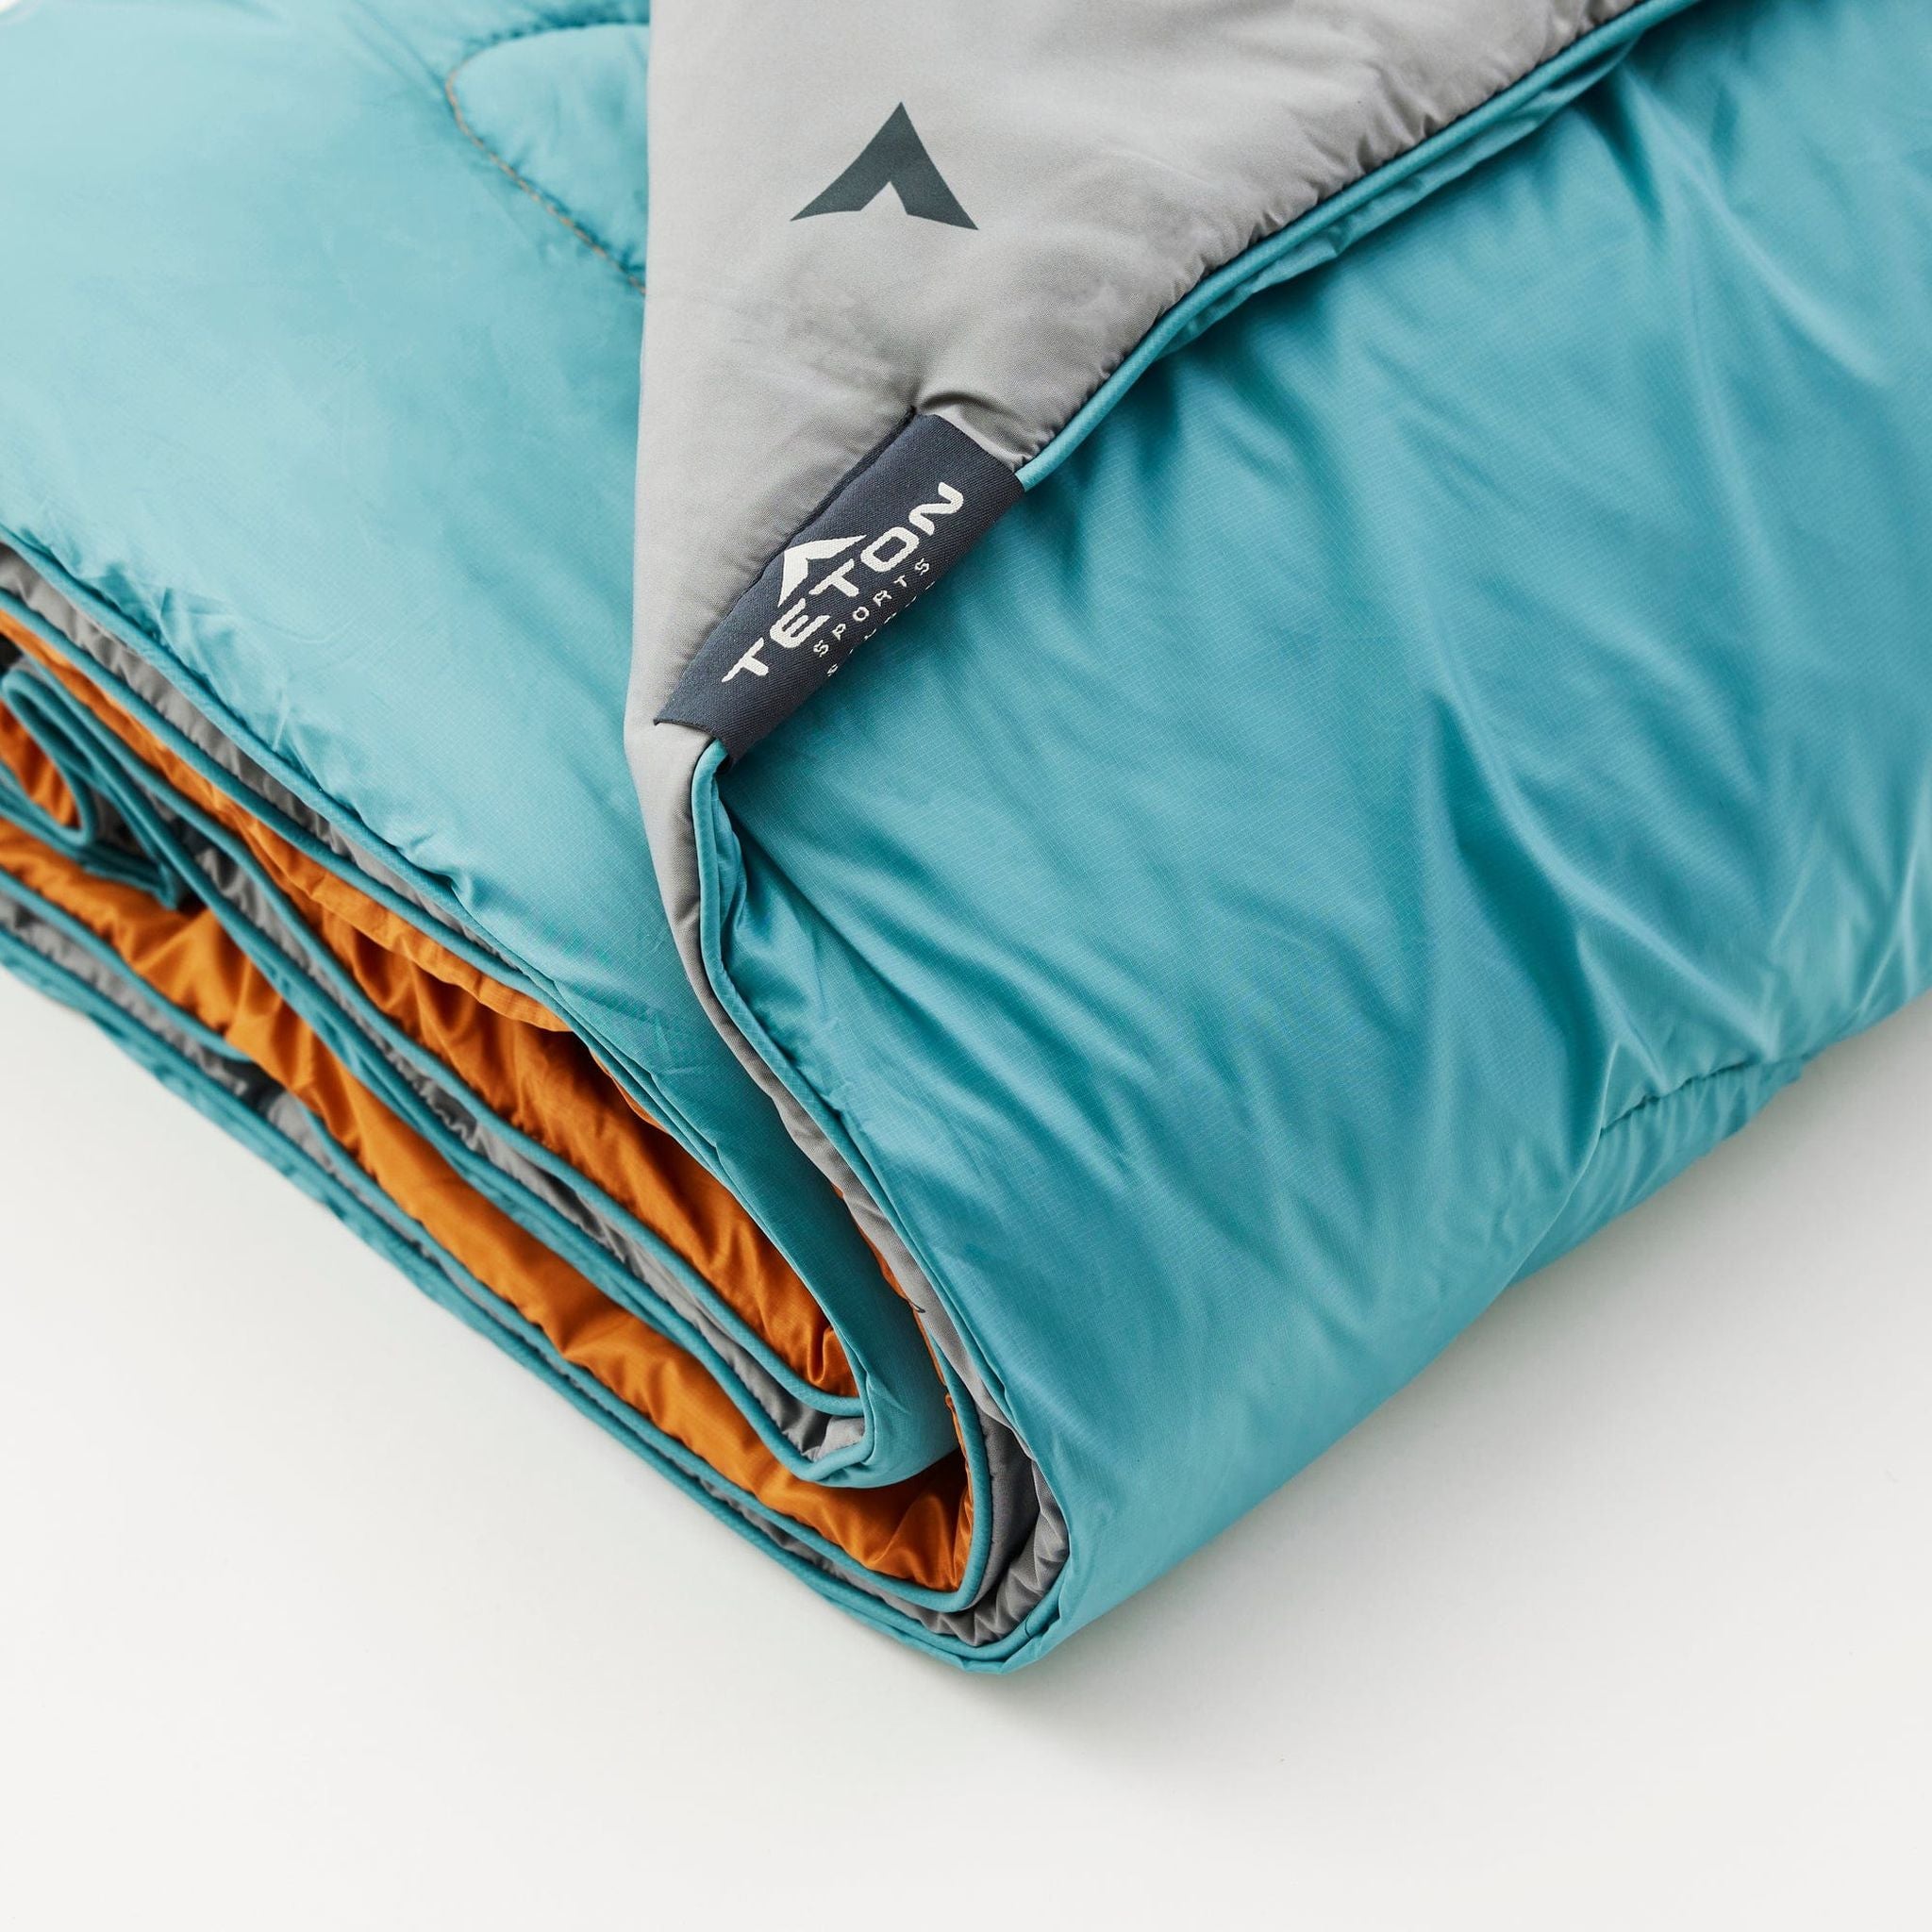 Teton Sports Acadia Outdoor Camp Blanket in Teal/Copper